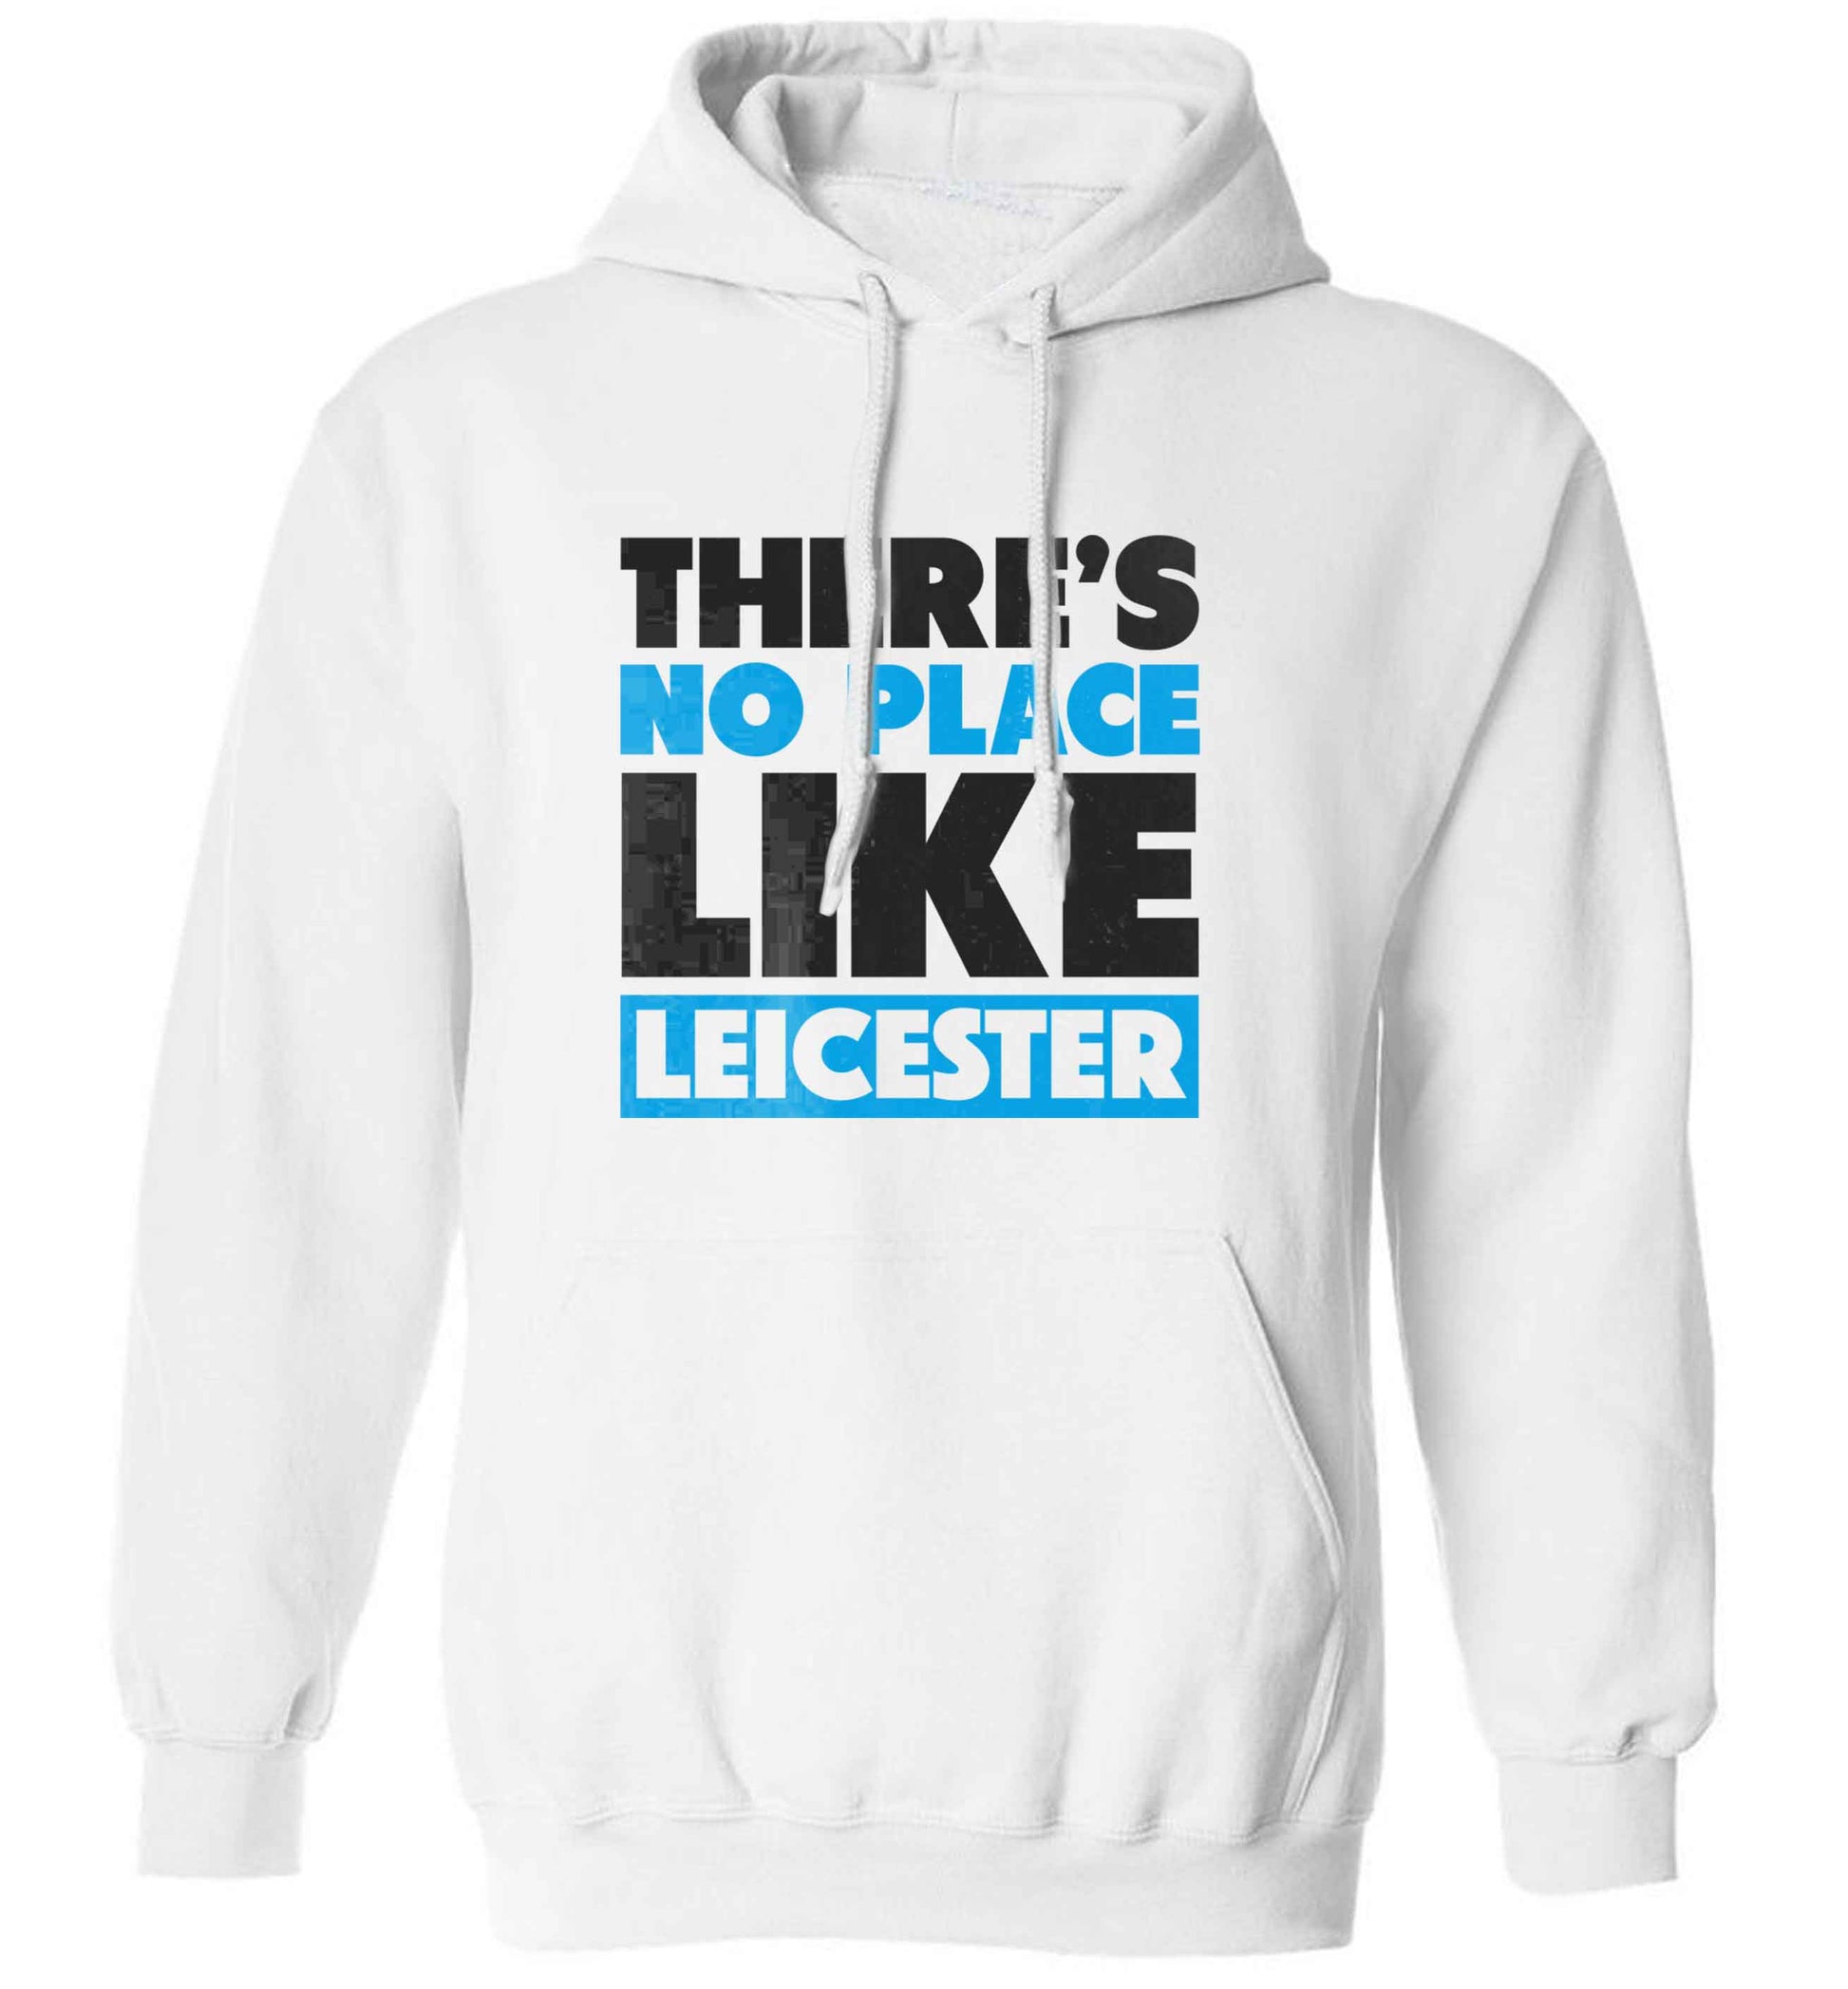 There's no place like Leicester adults unisex white hoodie 2XL